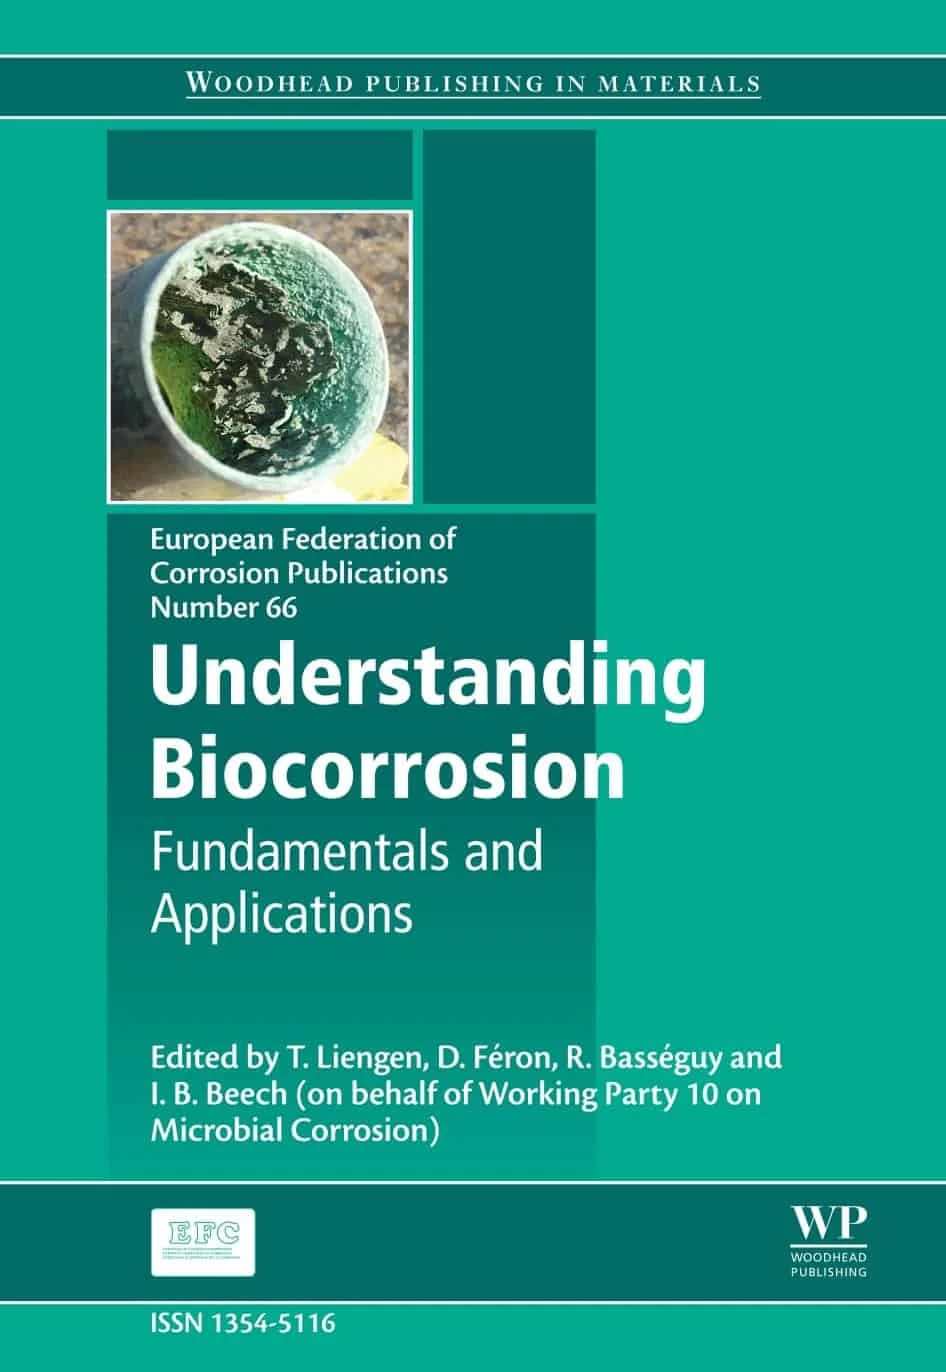 Sample cover of The European Federation of Corrosion “Green” Books Series